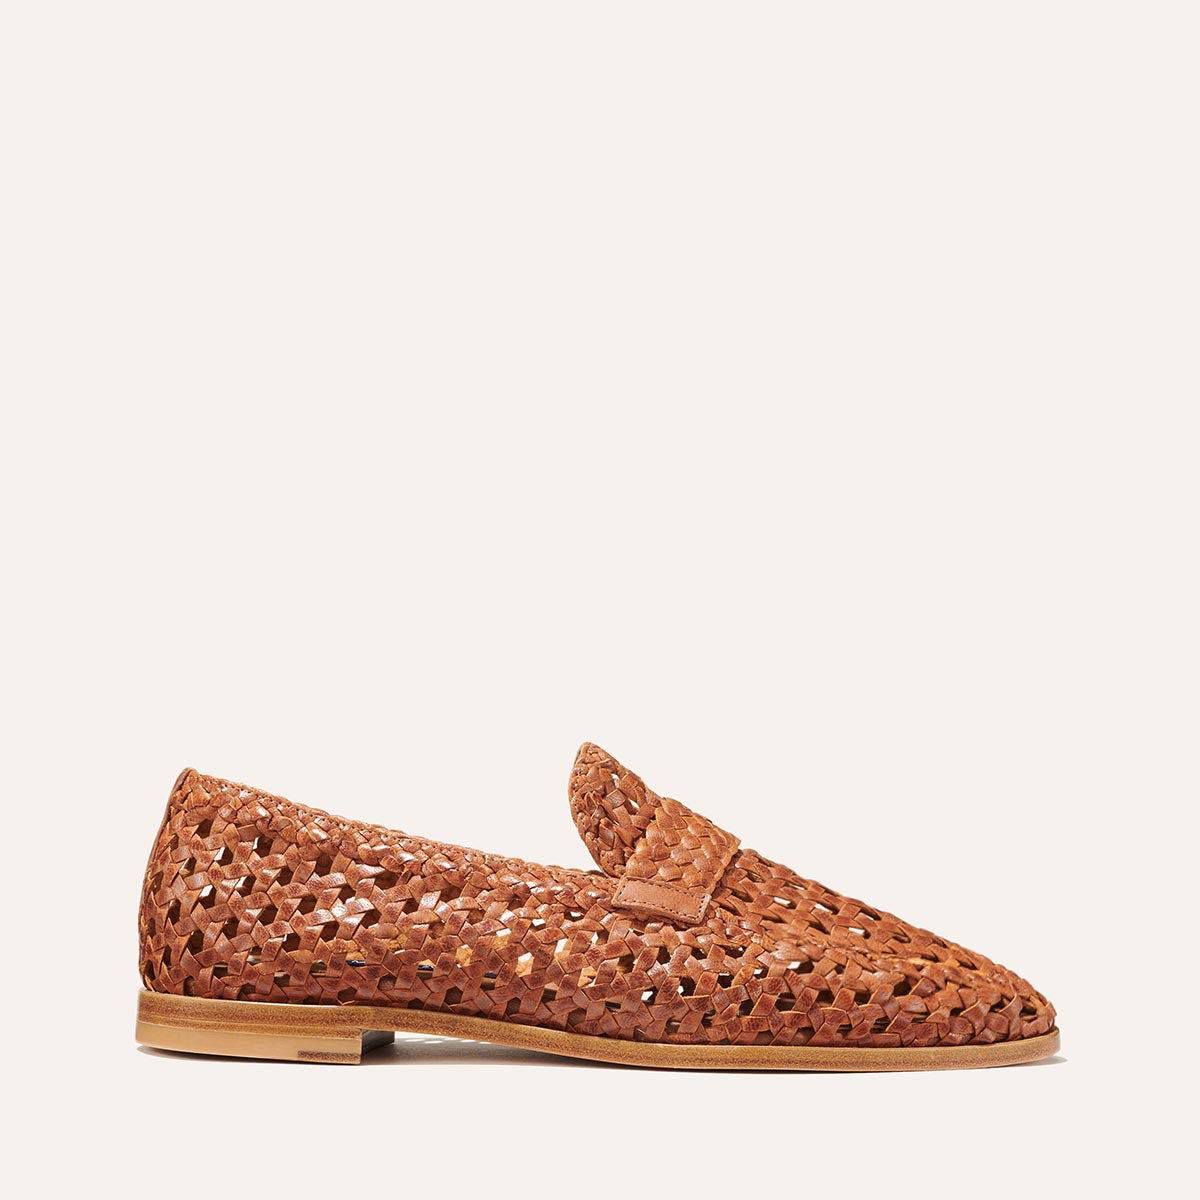 The Woven Andie Loafer - Saddle by MARGAUX